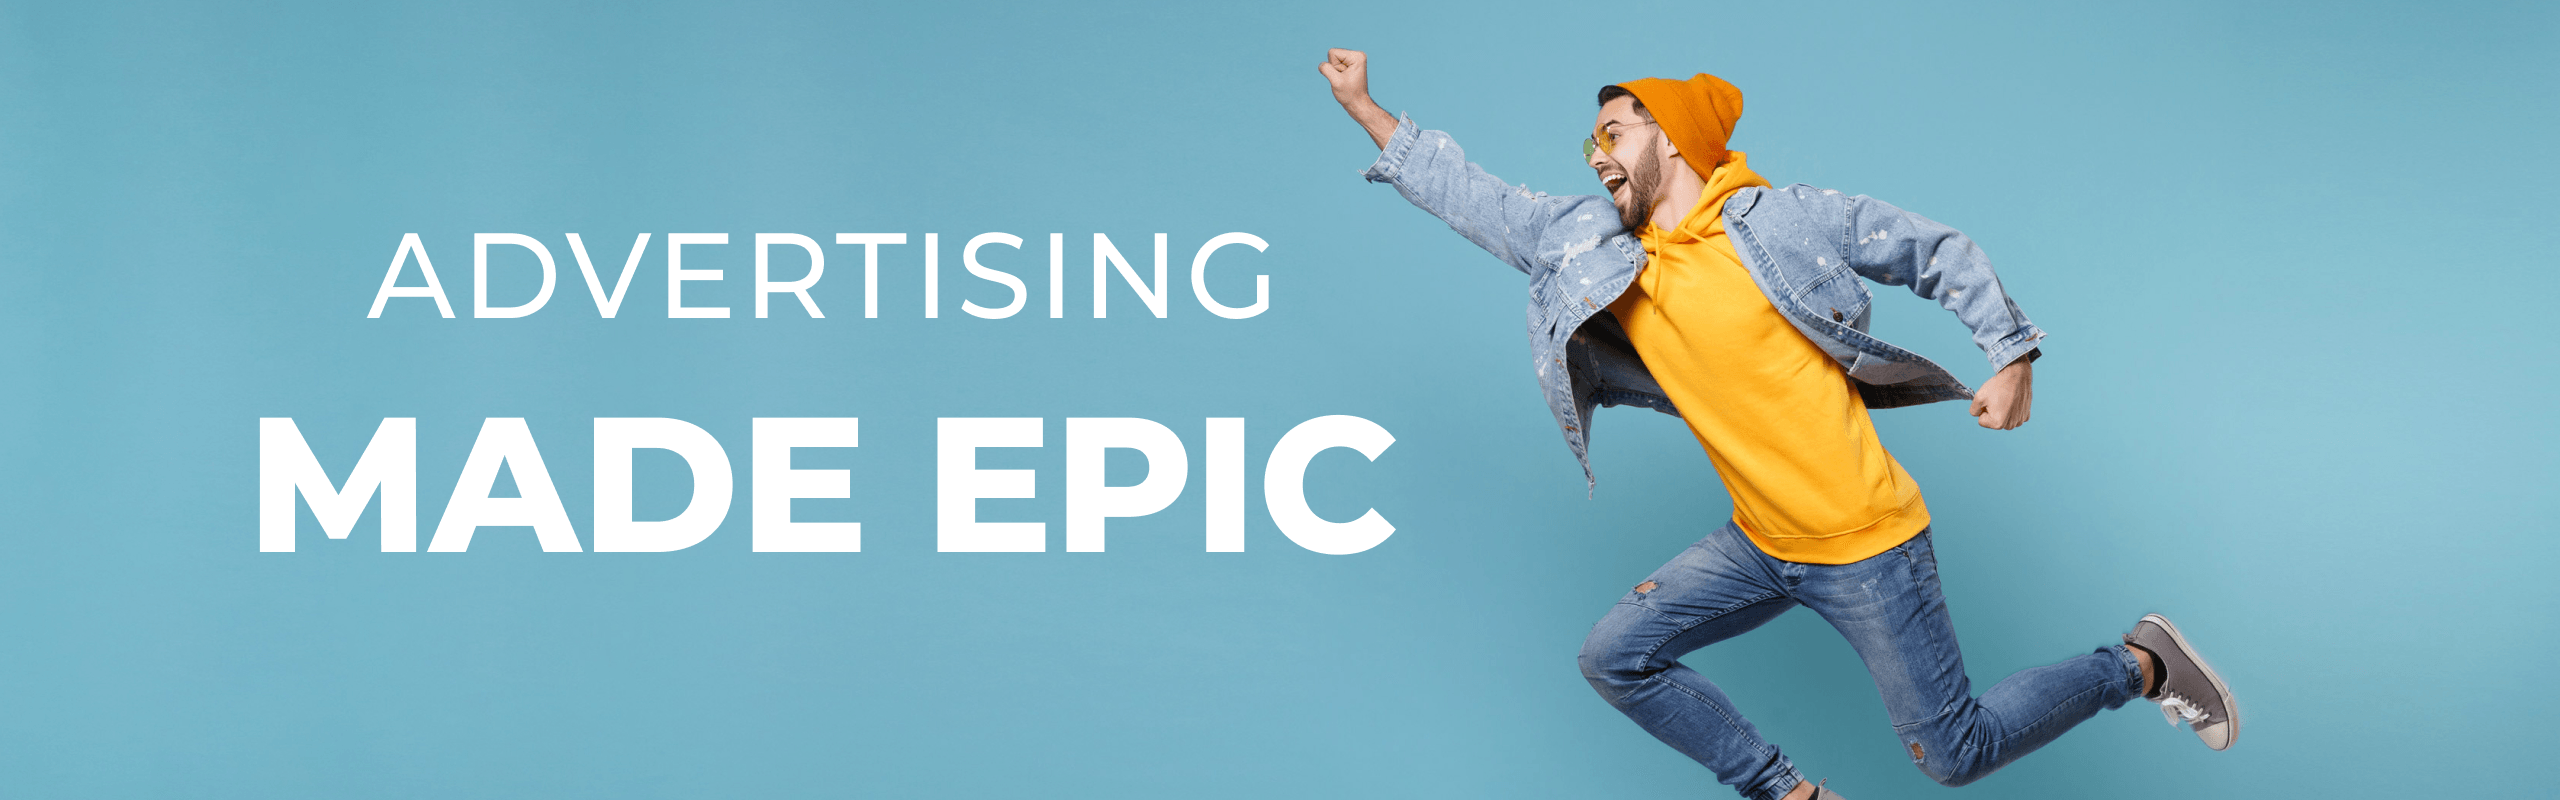 At YOU ARE EPIC, we make advertising epic to support charitable projects.